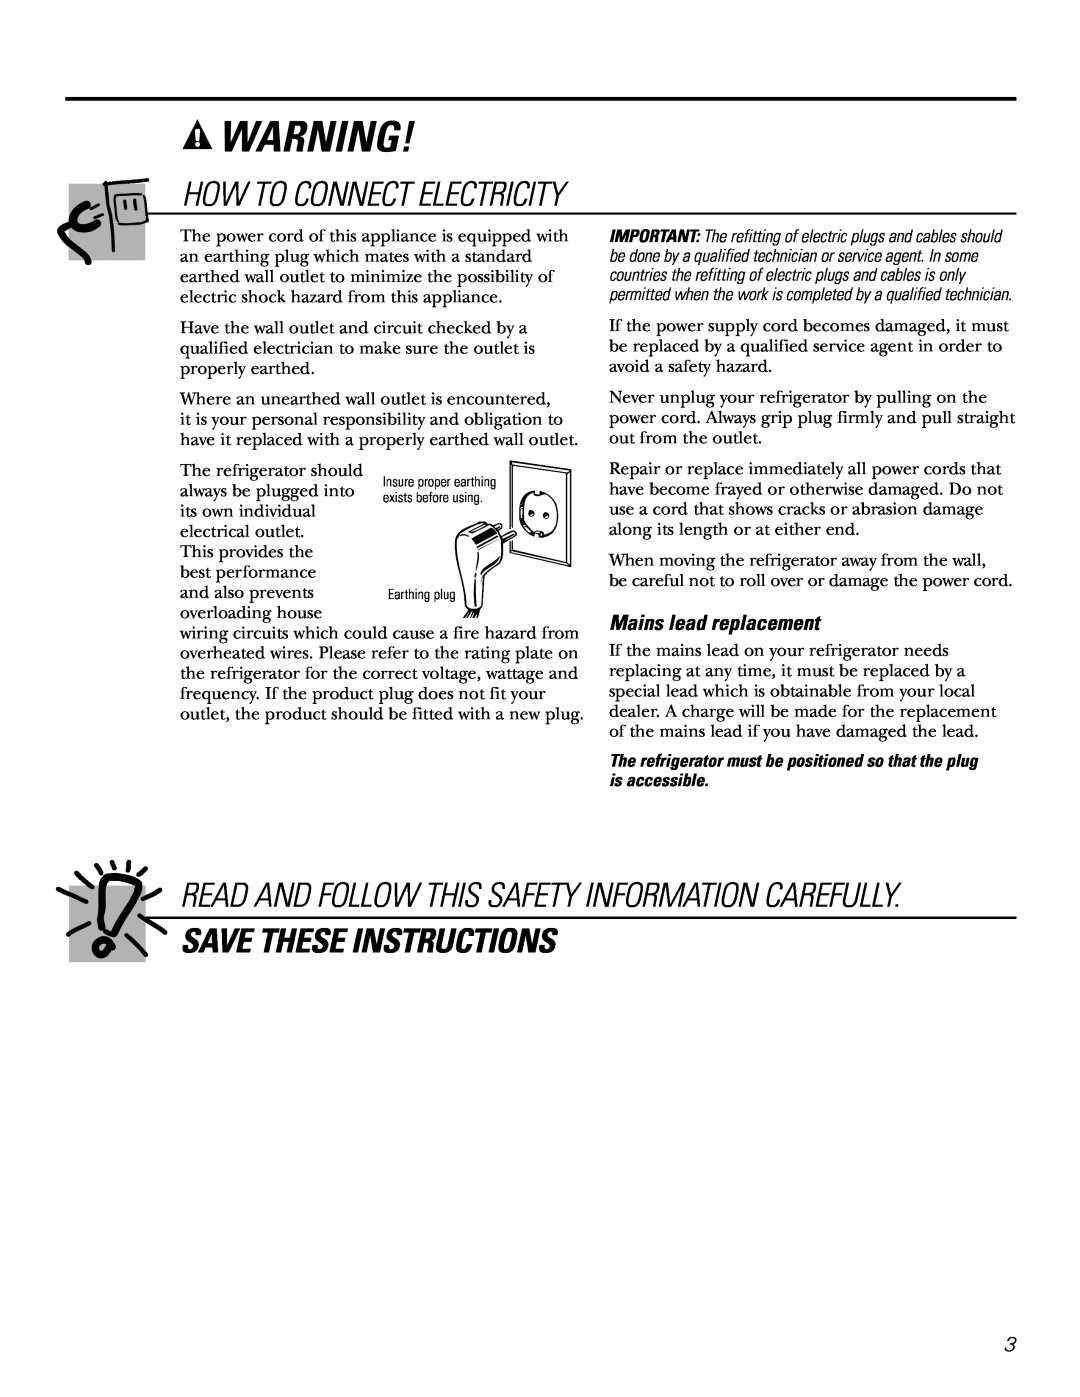 GE 200D2600P031 How To Connect Electricity, Save These Instructions, Read And Follow This Safety Information Carefully 